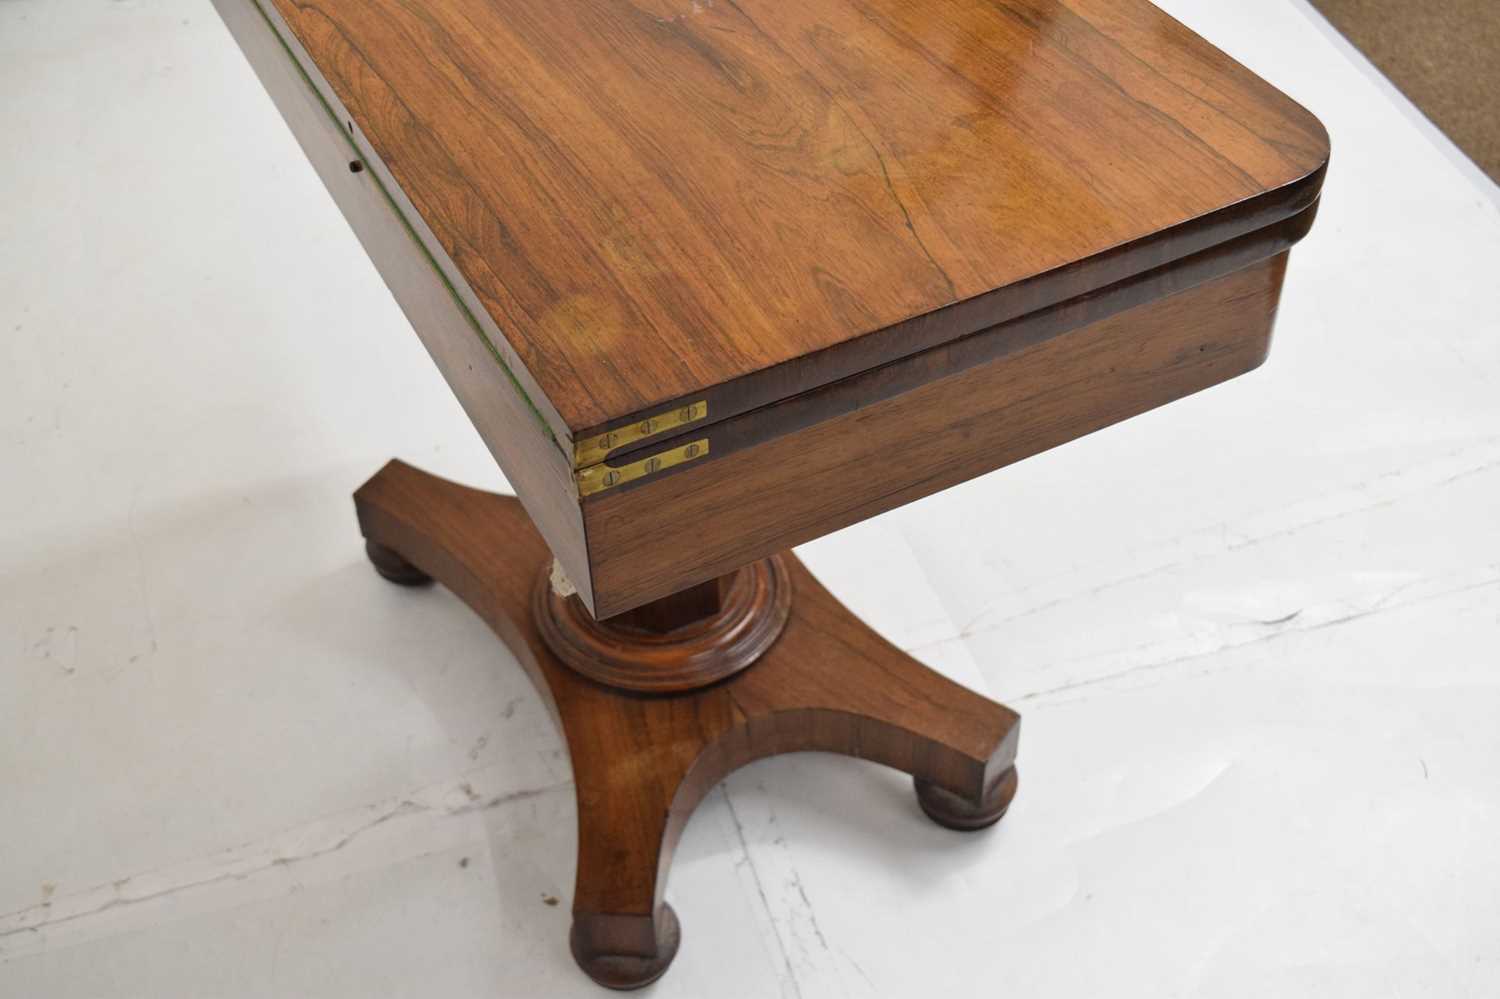 Second quarter 19th century rosewood fold-over pedestal card table - Image 6 of 10